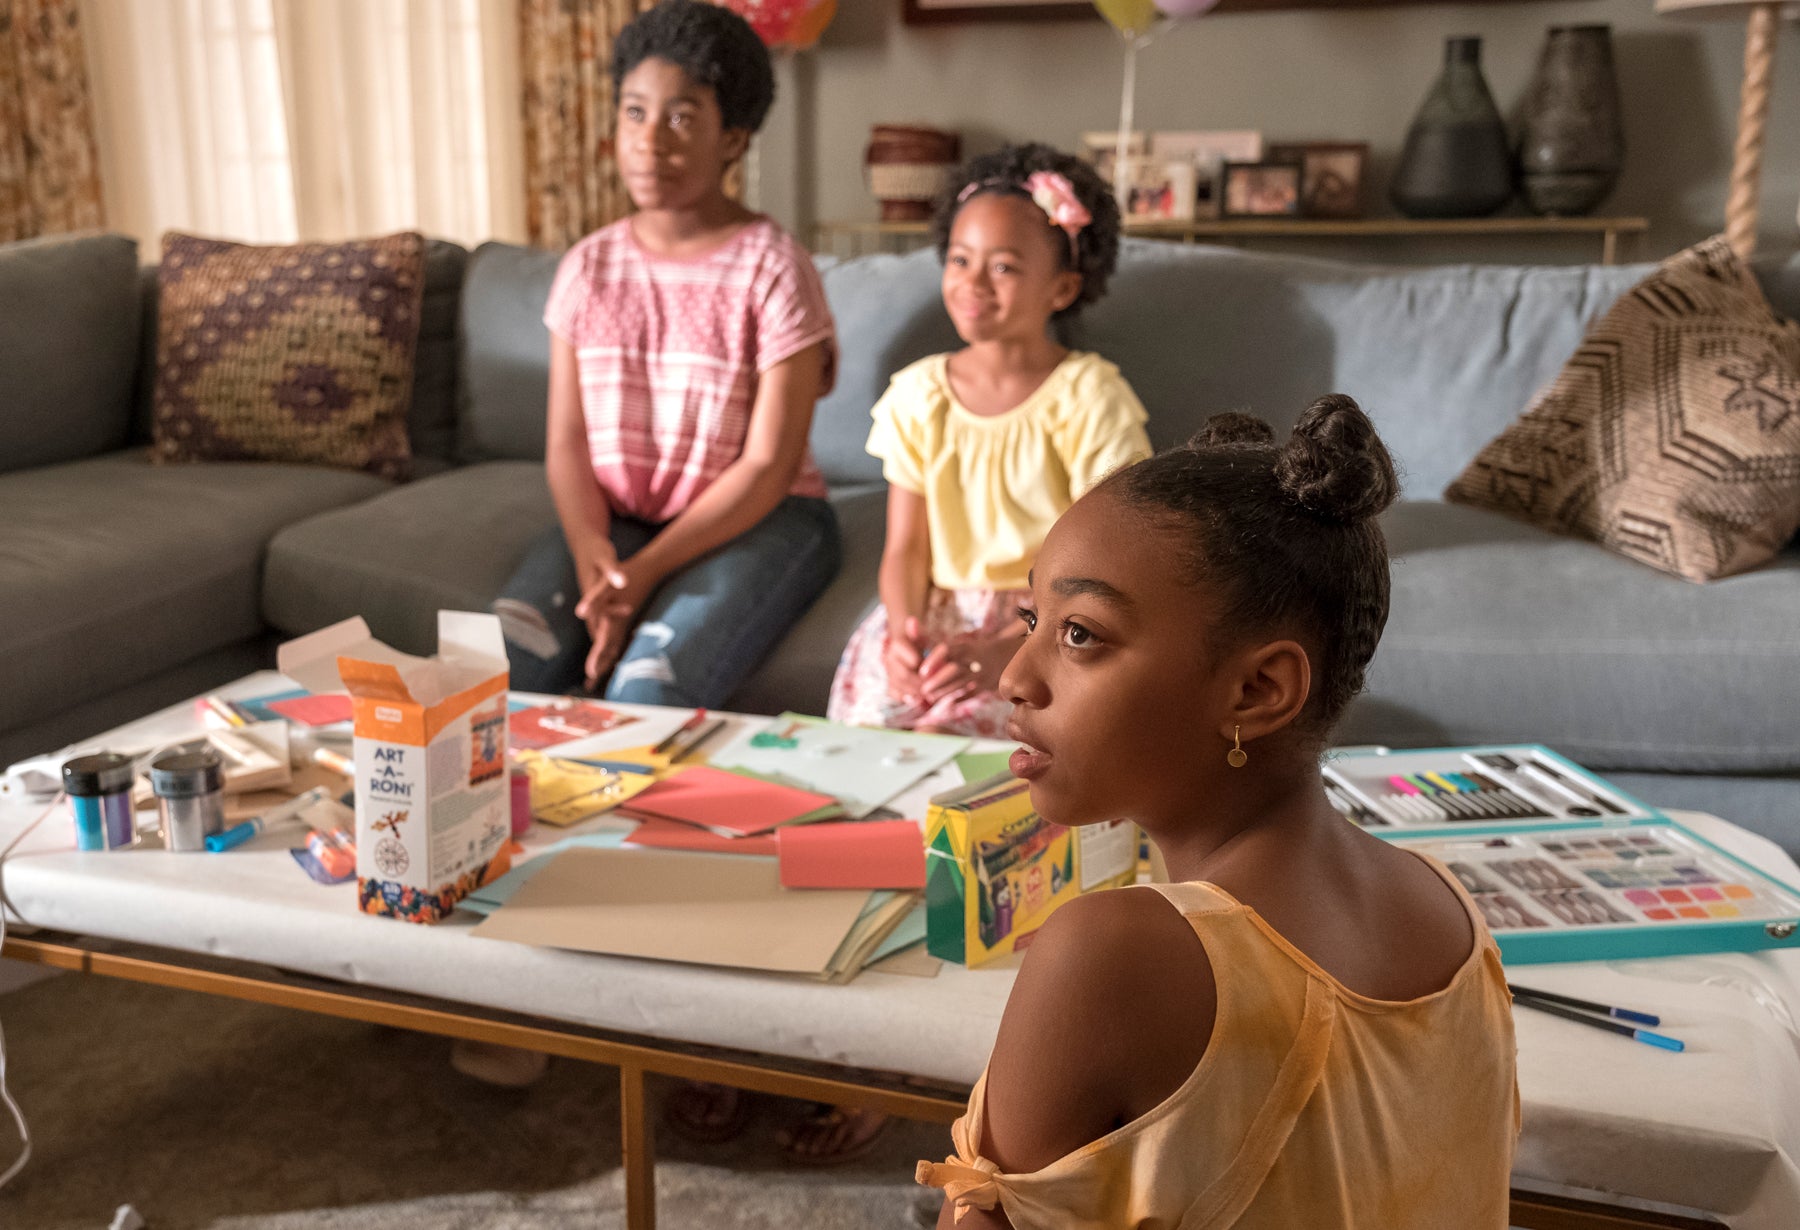 Deja (left), Annie Pearson (middle), and Tess Pearson (foreground) sit in a living room looking off camera in an episode of This Is Us. Crayons and craft supplies cover a coffee table between them.